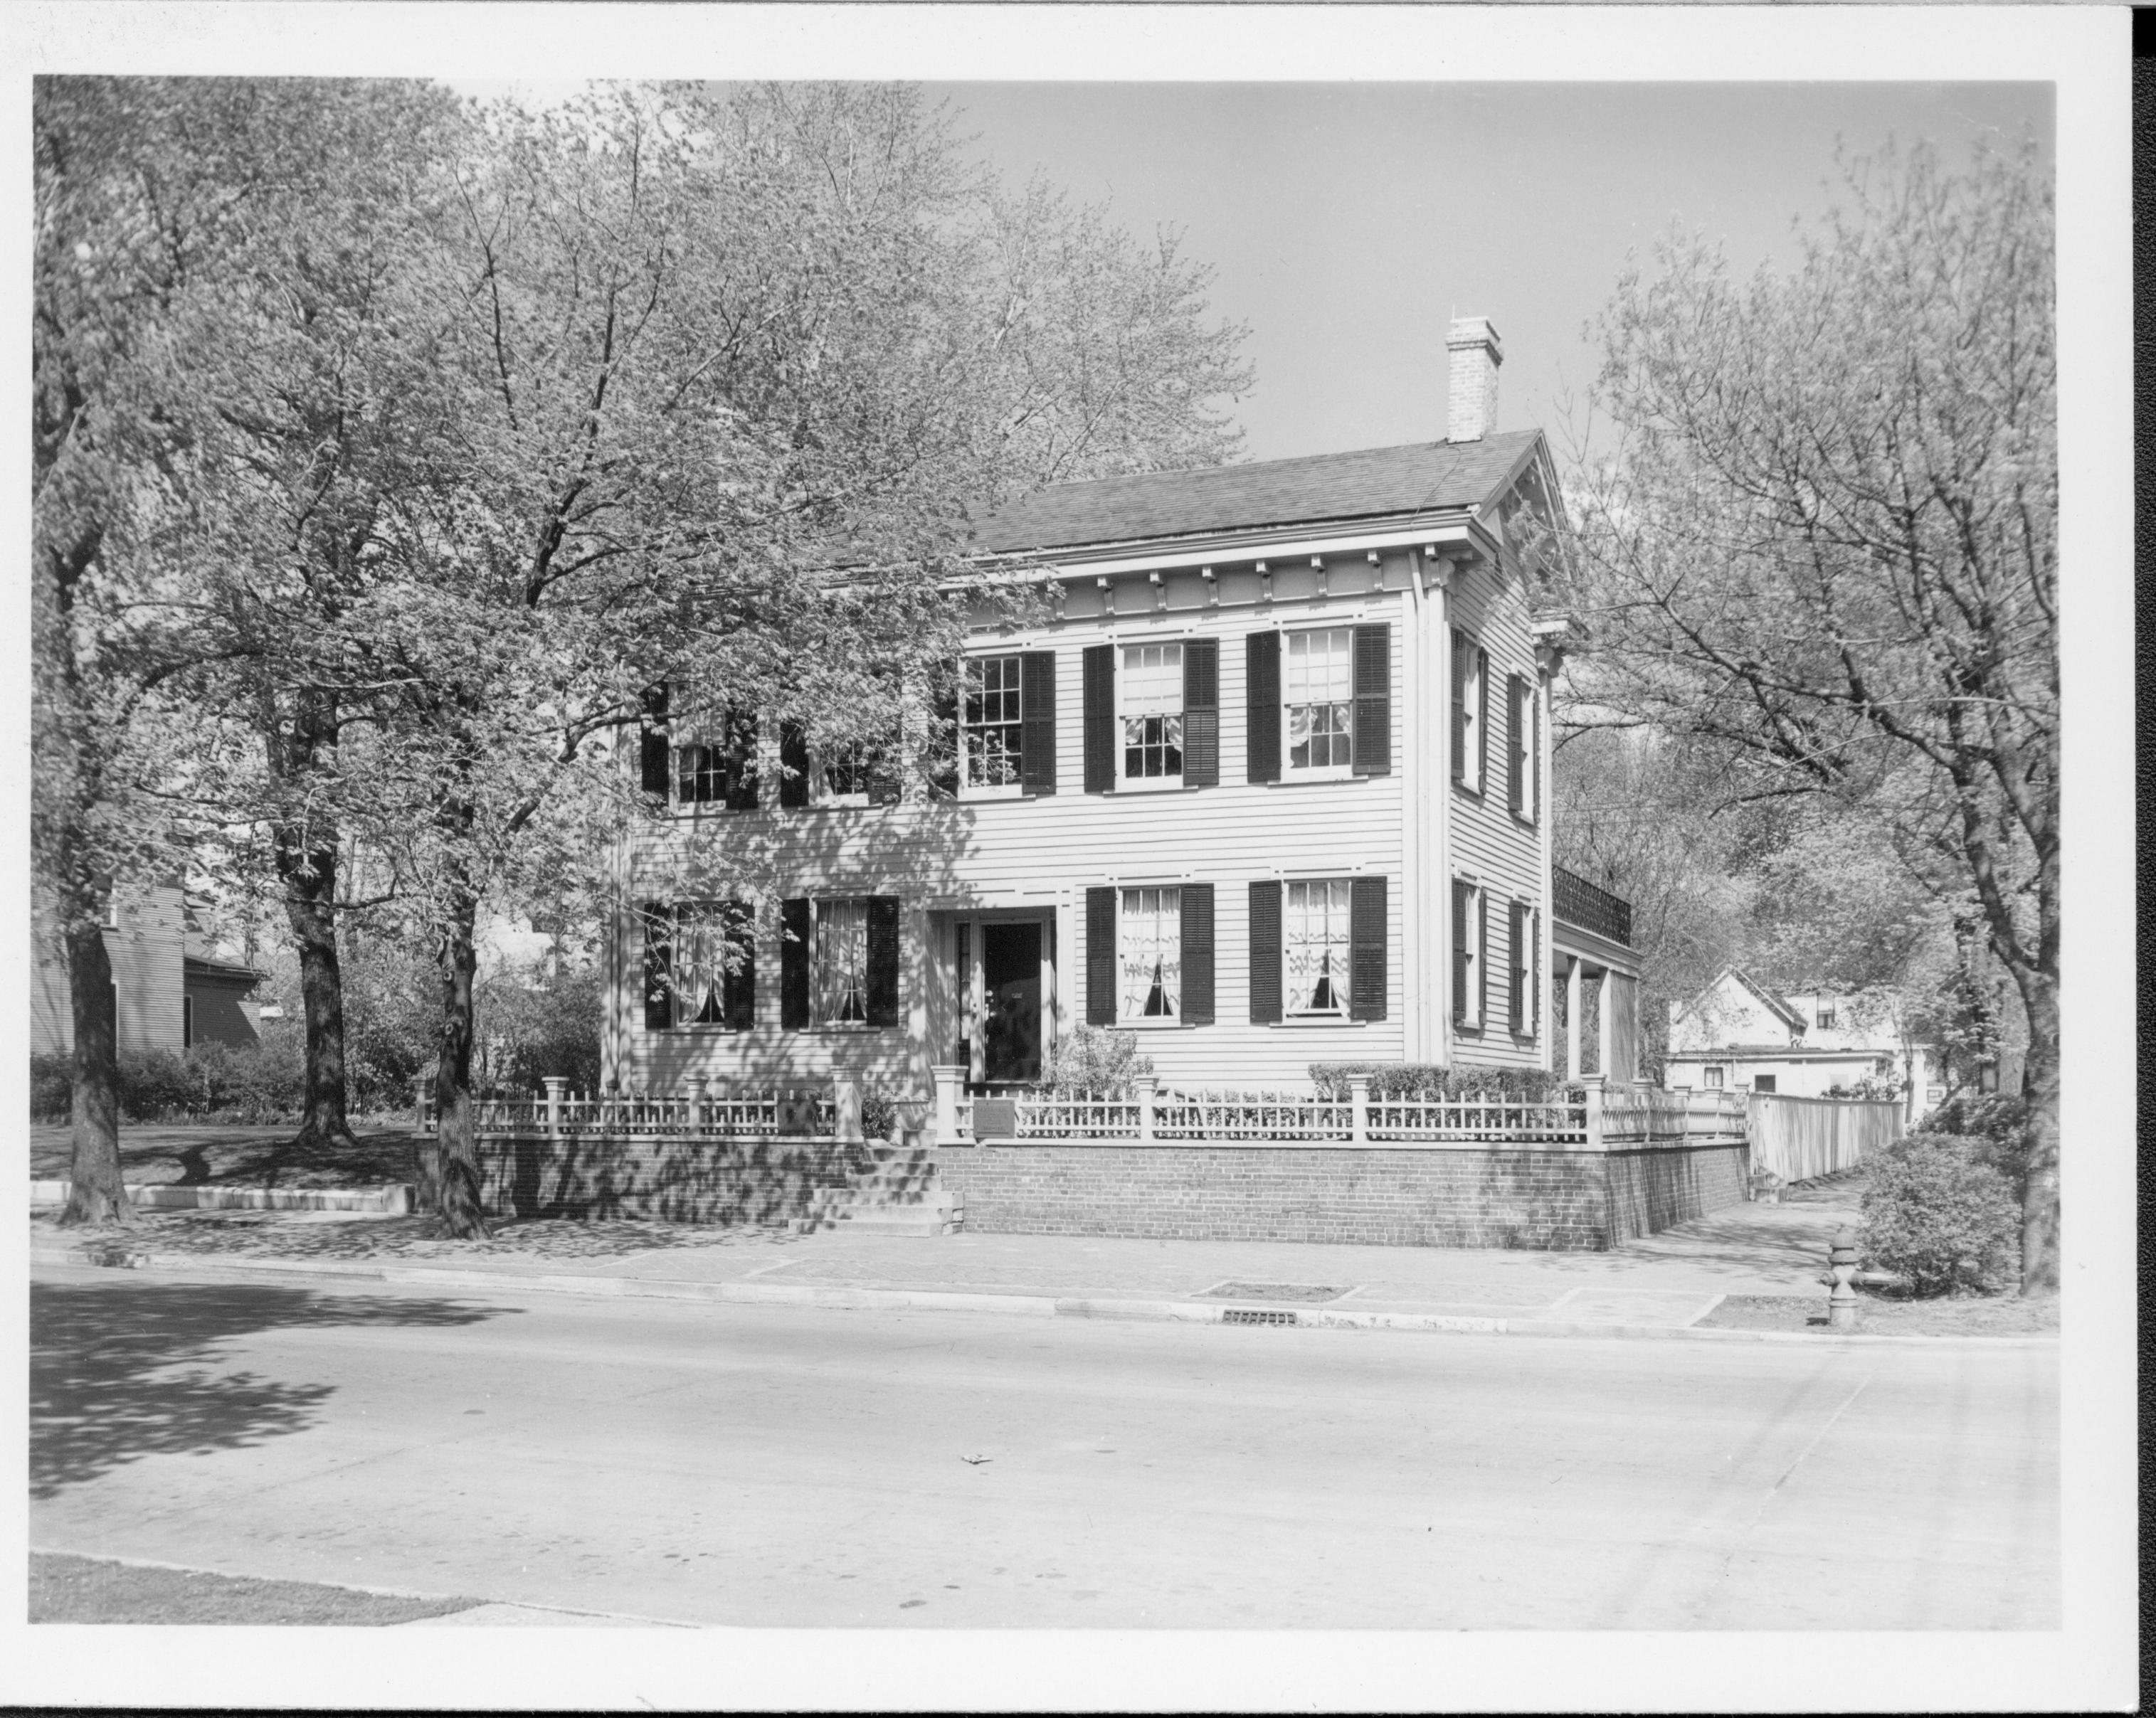 Lincoln Home west (front) elevation in summer, with several trees around it.  Fire hydrant on corner.  Two story houses on far left in Bugg lot (Block 10, lot 5) and Kercheval lot (Block 10, lot 9). Paved street. House appears to be painted white. Looking Northeast from 8th and Jackson Street intersection Lincoln Home, Bugg, Kercheval, paved street, fire hydrant, painted white